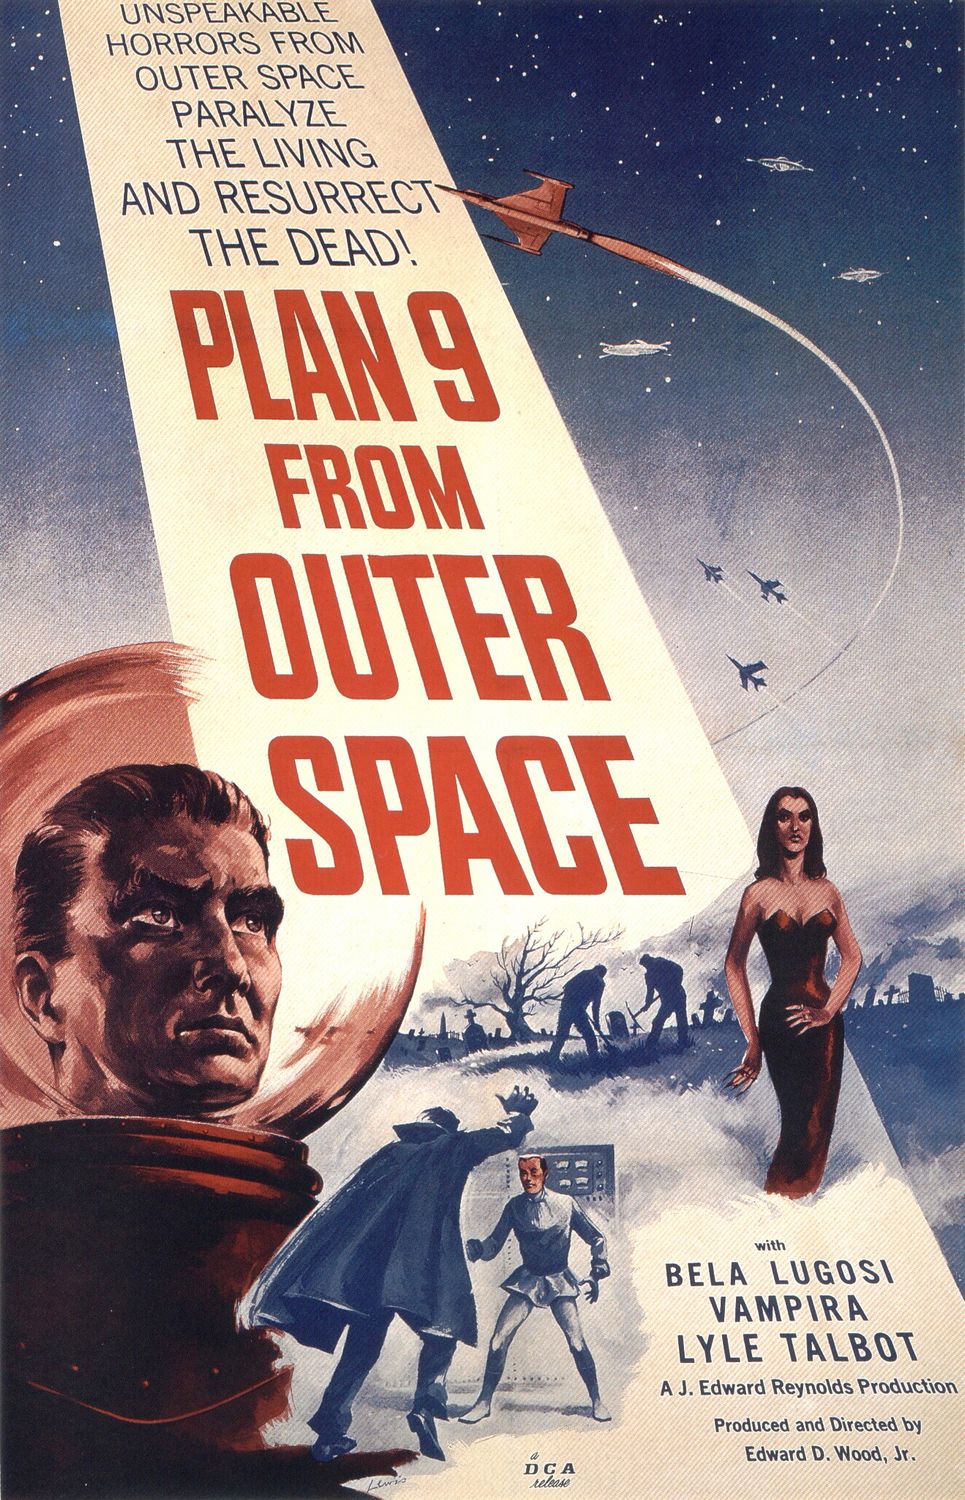 Plan nine from outer space.jpg